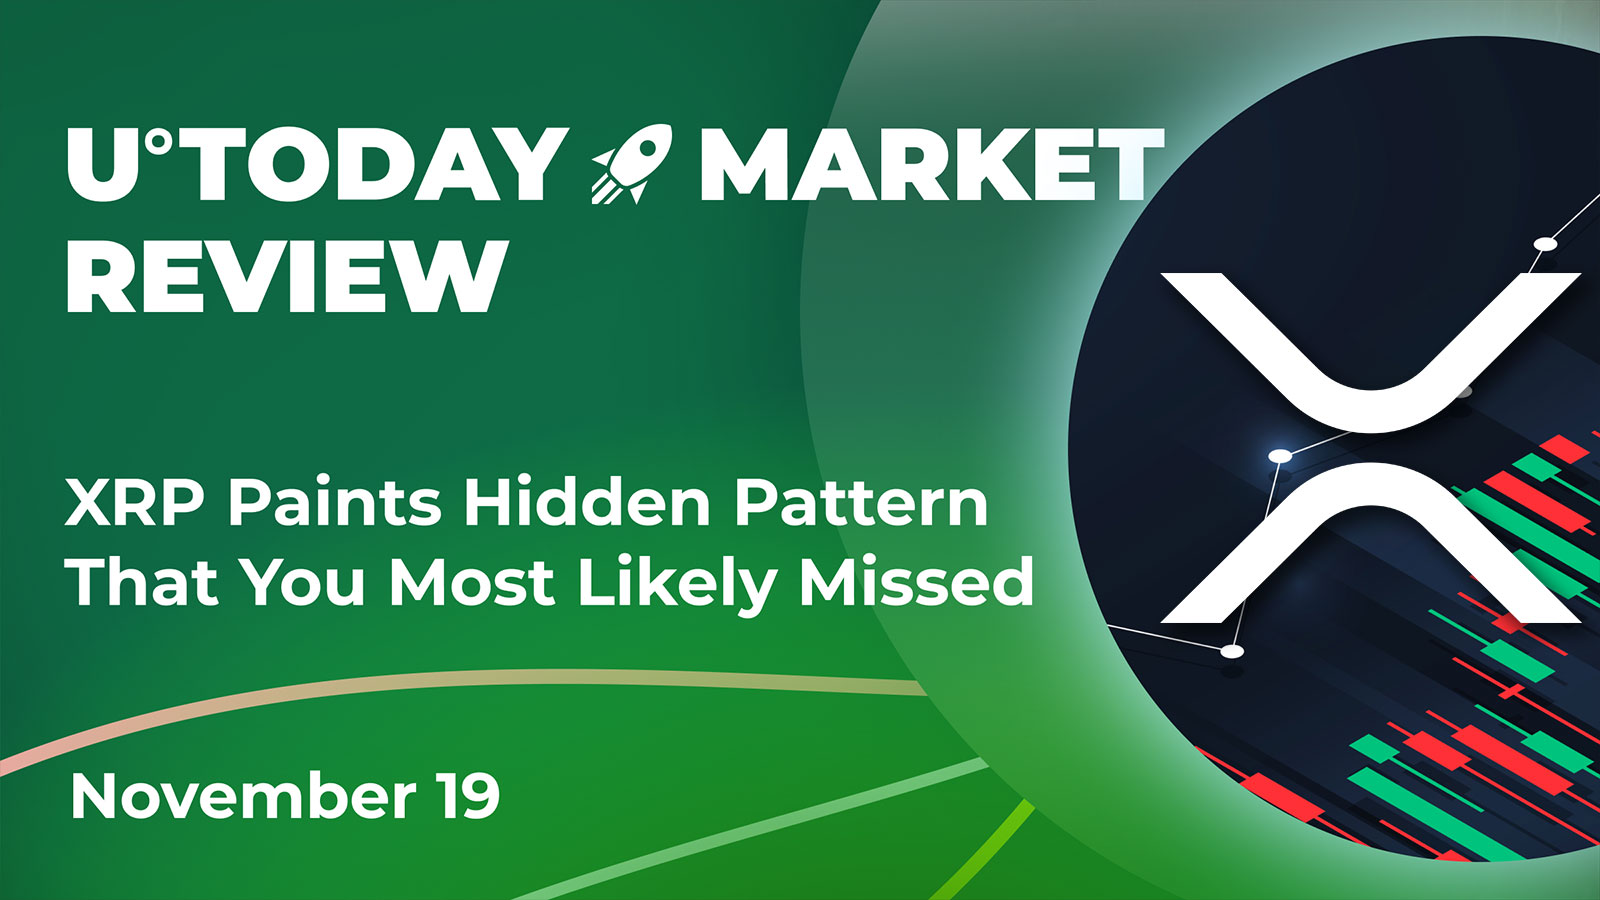 XRP Paints Hidden Pattern That You Most Likely Missed: Crypto Market Review, Nov. 21